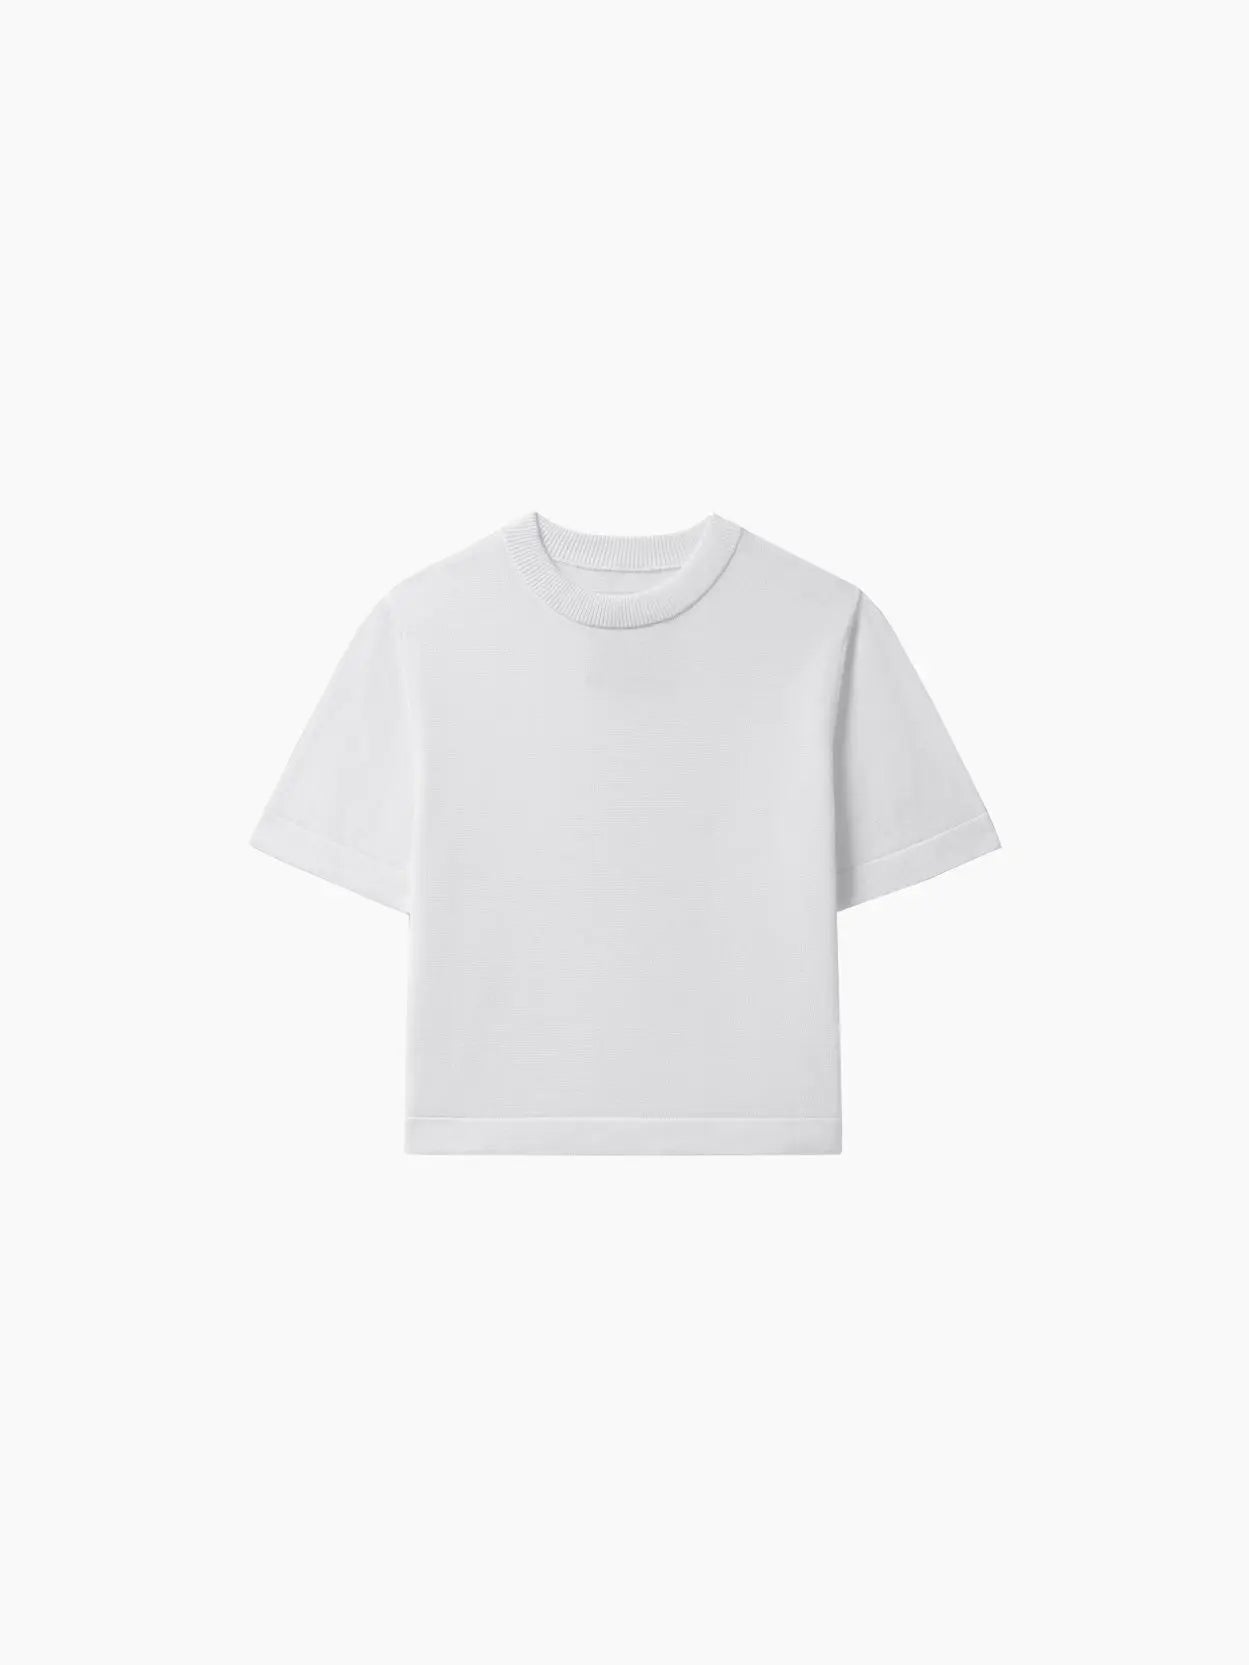 A Cotton T-Shirt White from Cordera is displayed against a white background. The t-shirt, available in their Barcelona store, has a round neckline and appears to be made of a light, comfortable fabric. The overall design is simple and classic.